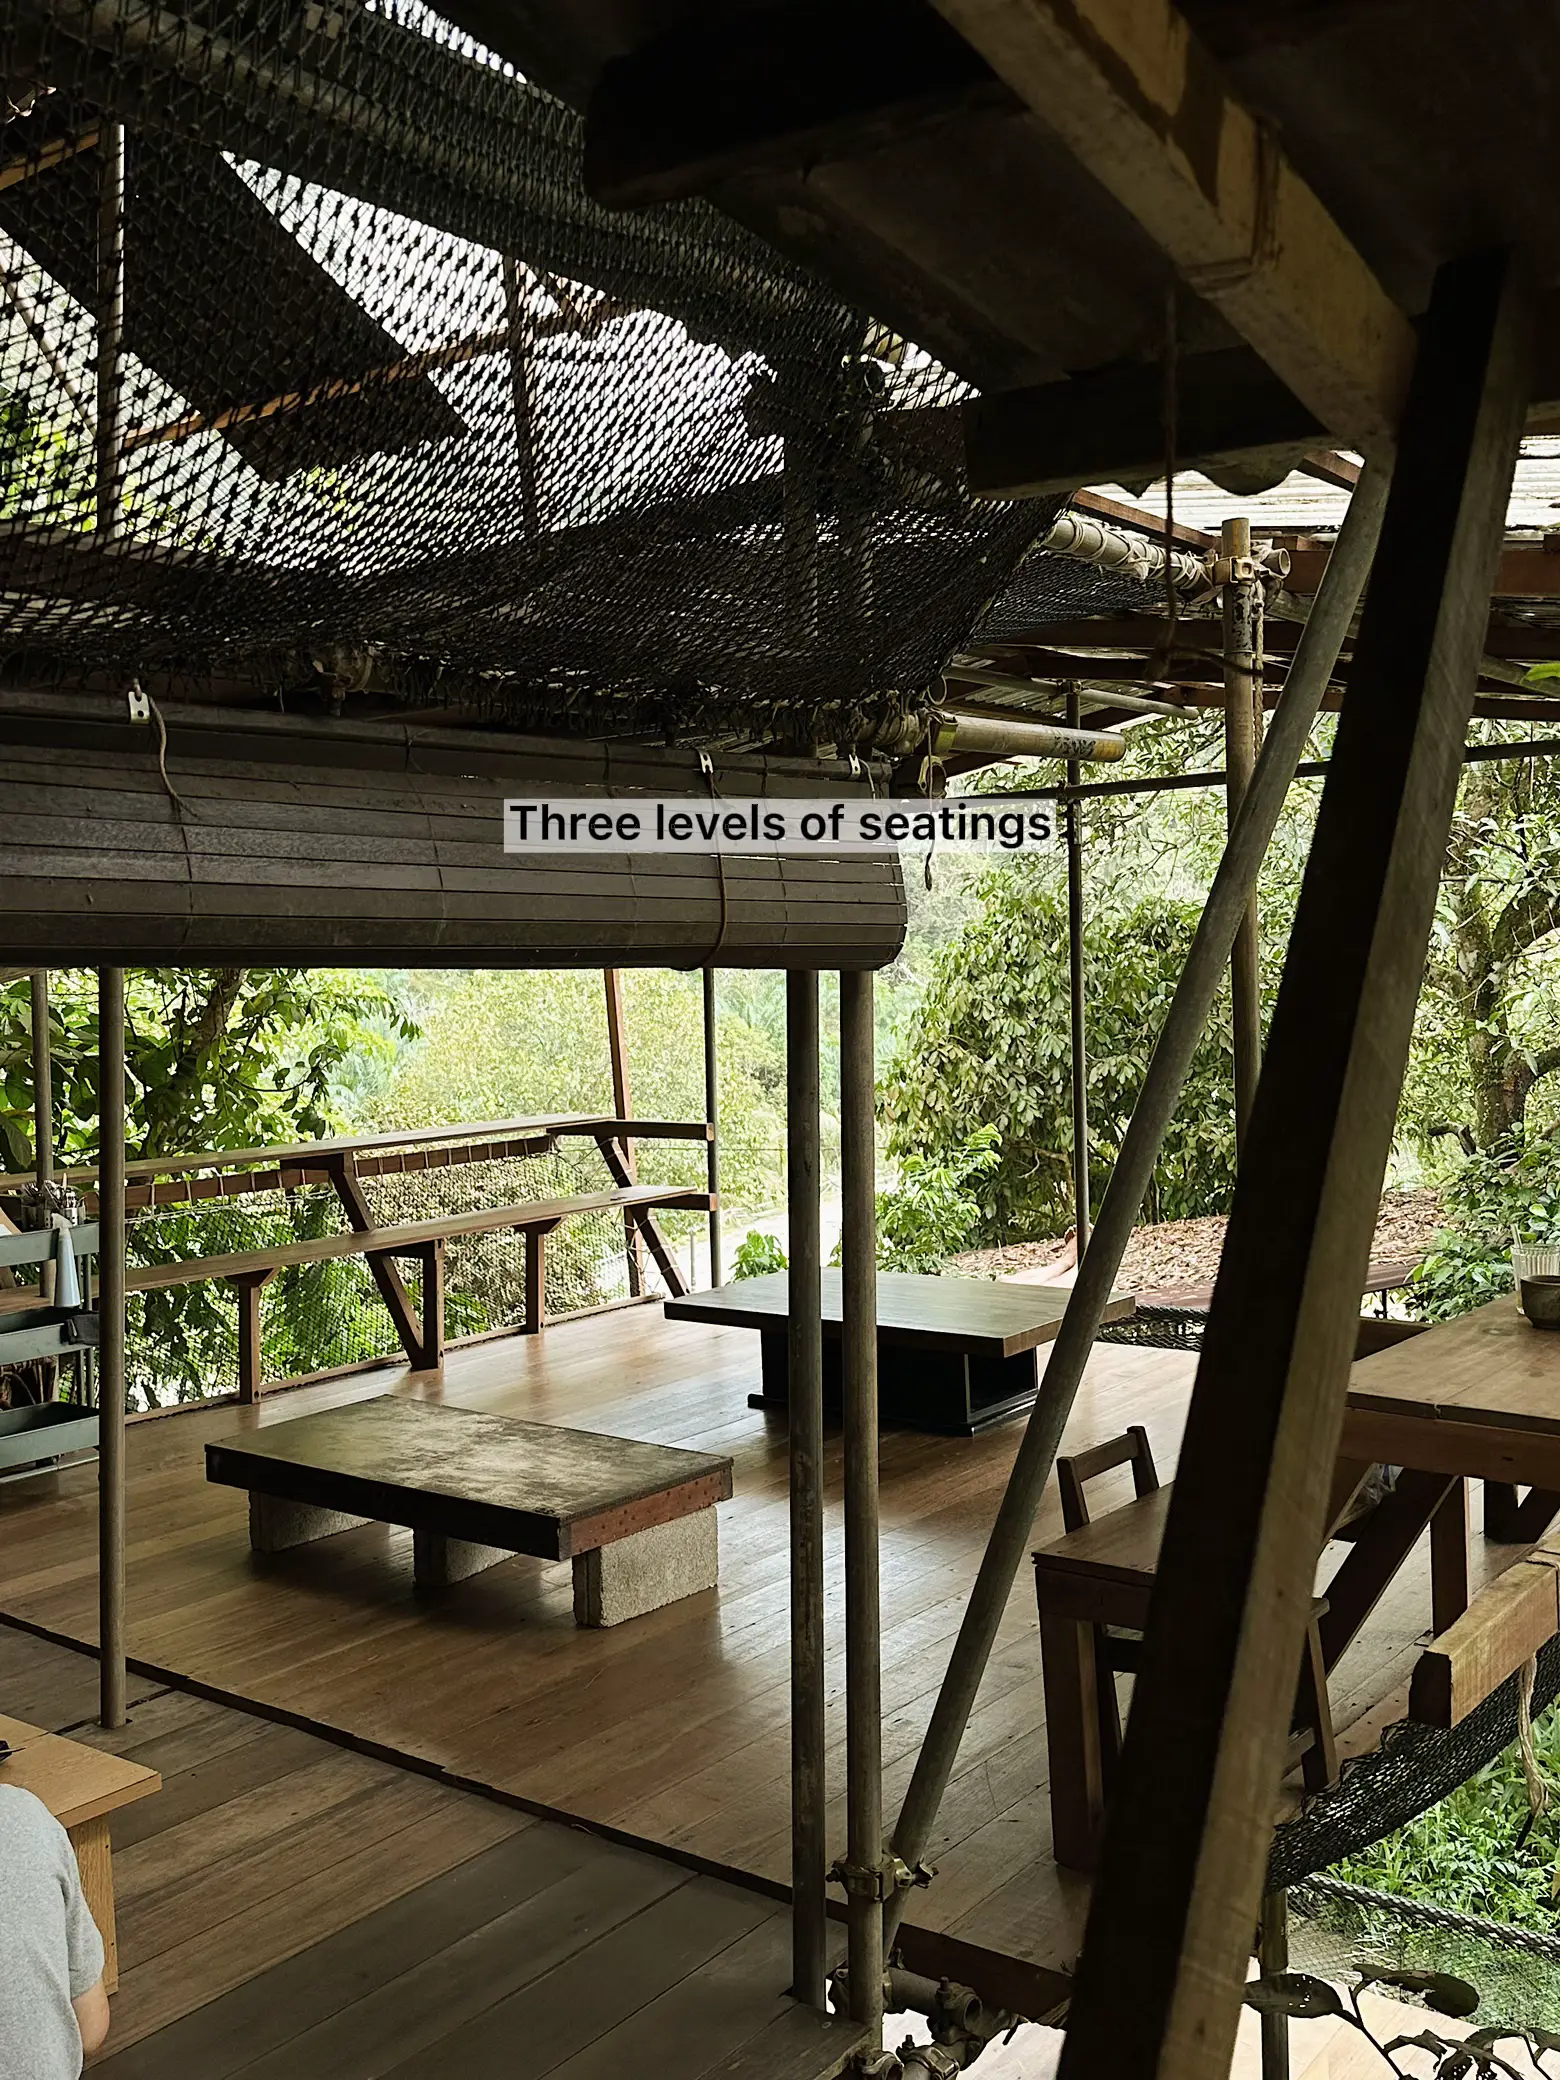 50mins from SG, a Treehouse Cafe in the Rainforest's images(3)